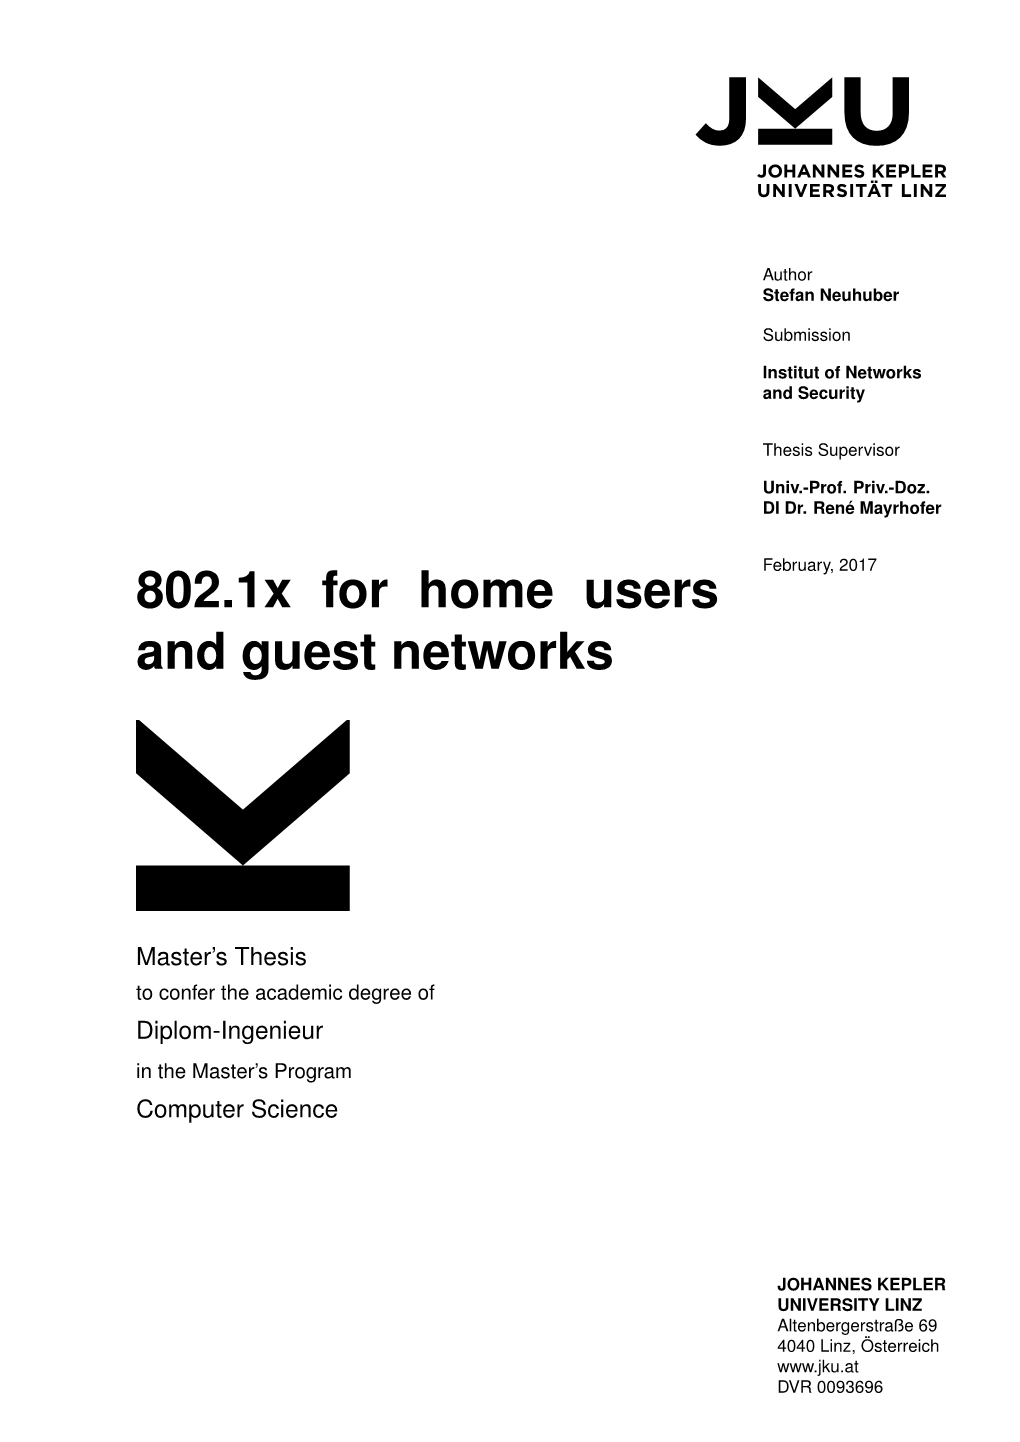 802.1X for Home Users and Guest Networks